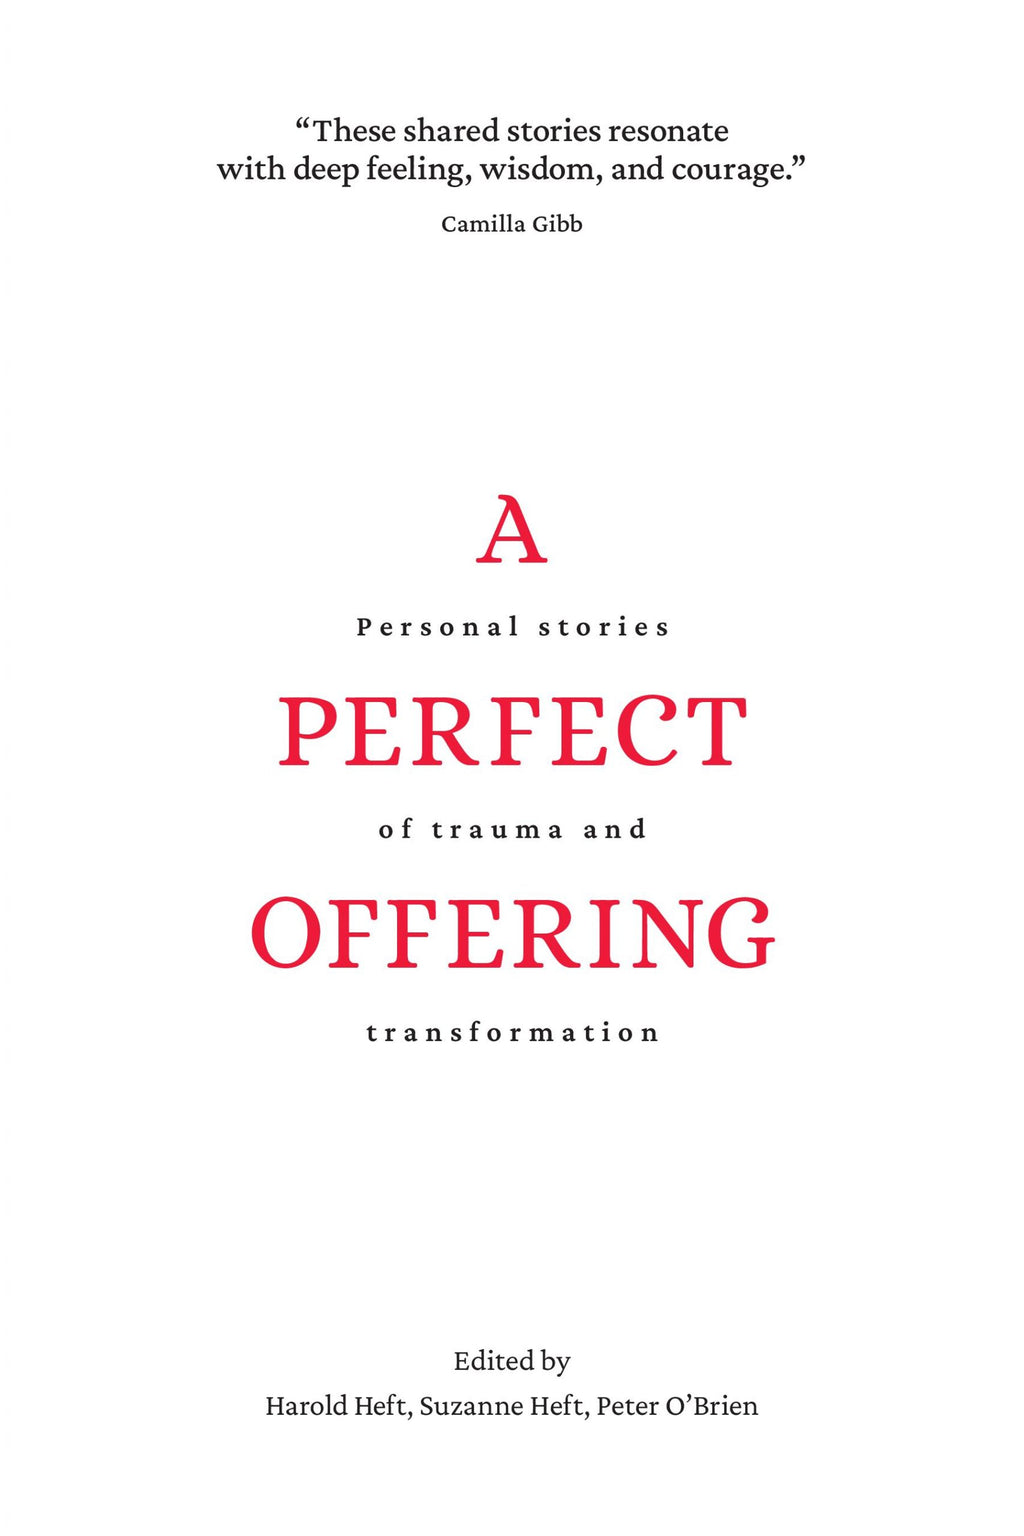 A Perfect Offering: Personal Stories of Trauma and Transformation | Harold Heft - Suzanne Heft - Peter O'Brien